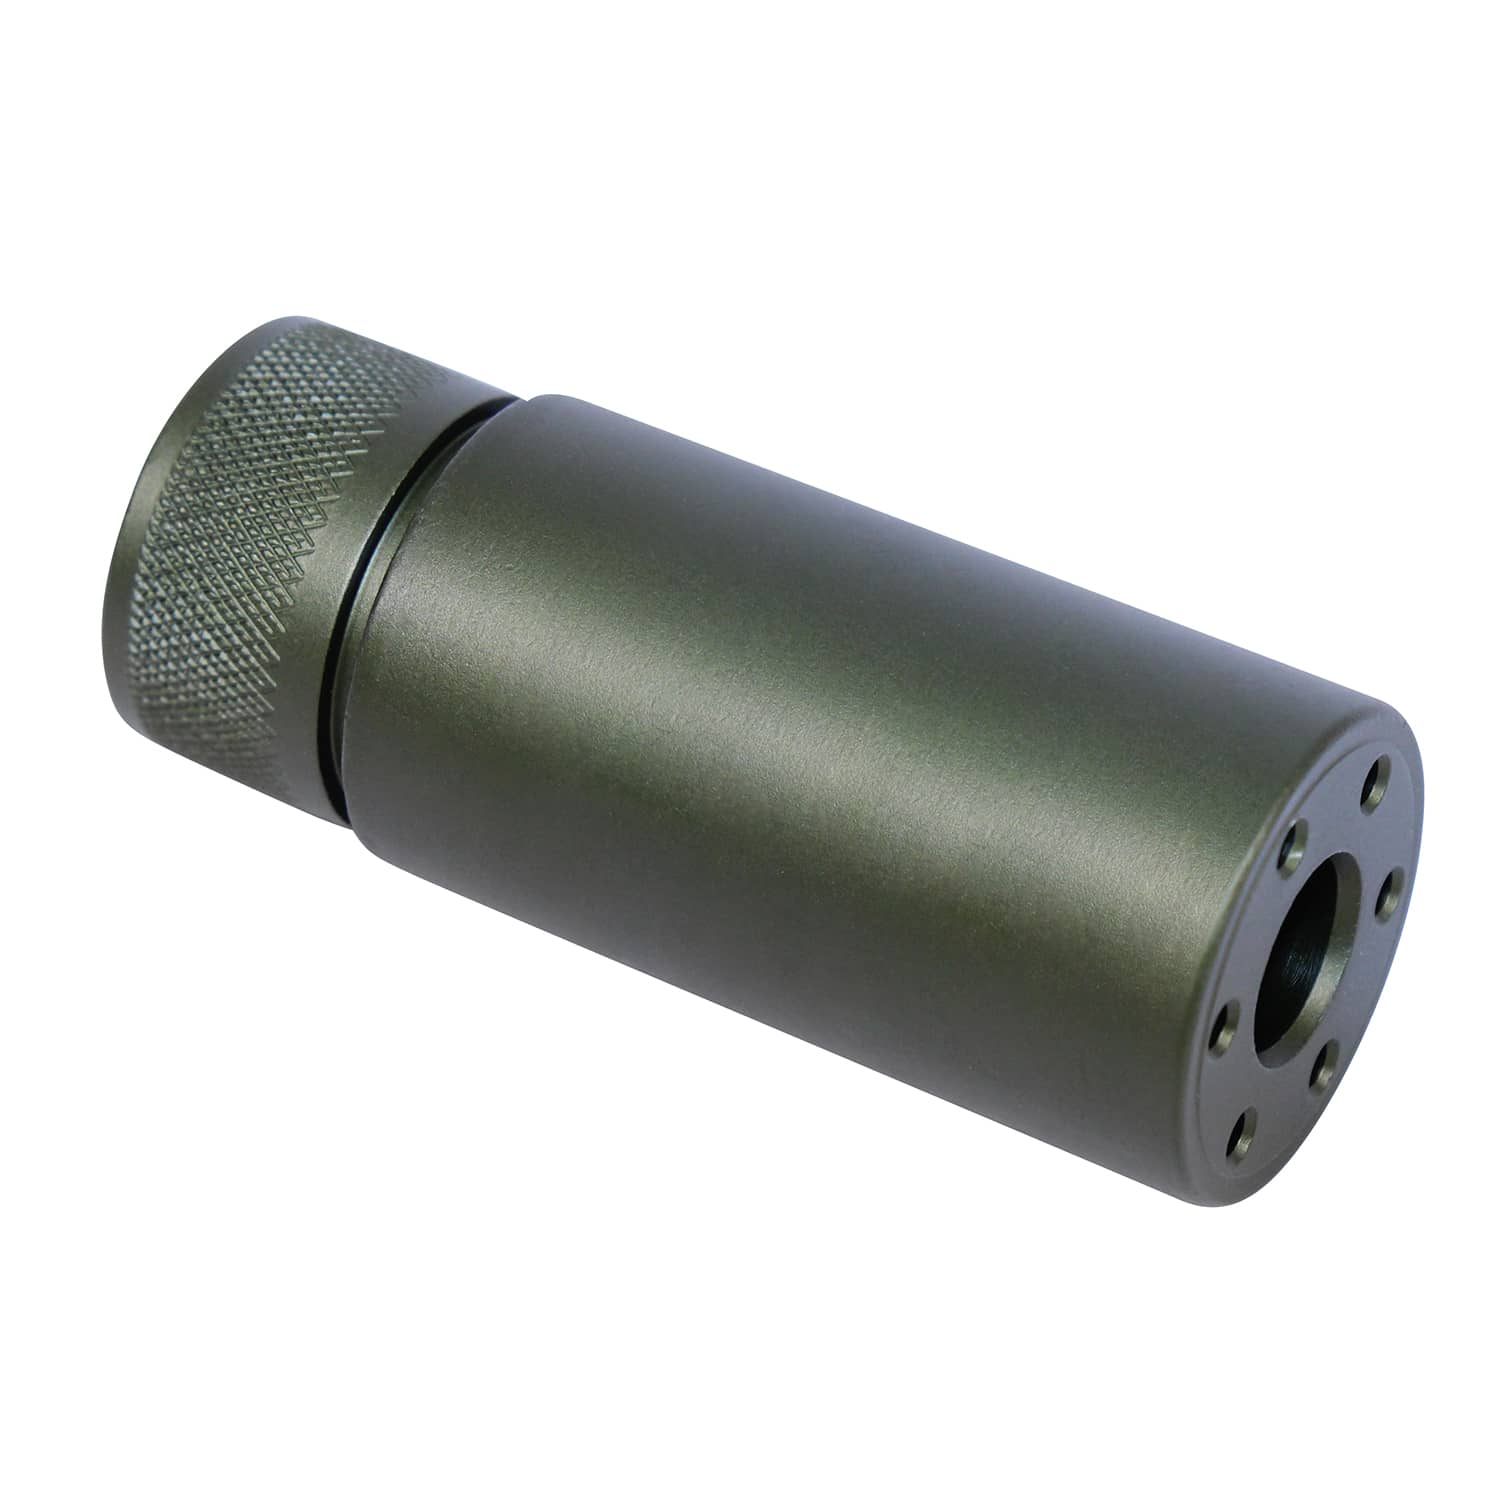 Short anodized green 3-inch AR-15 fake suppressor with textured cap